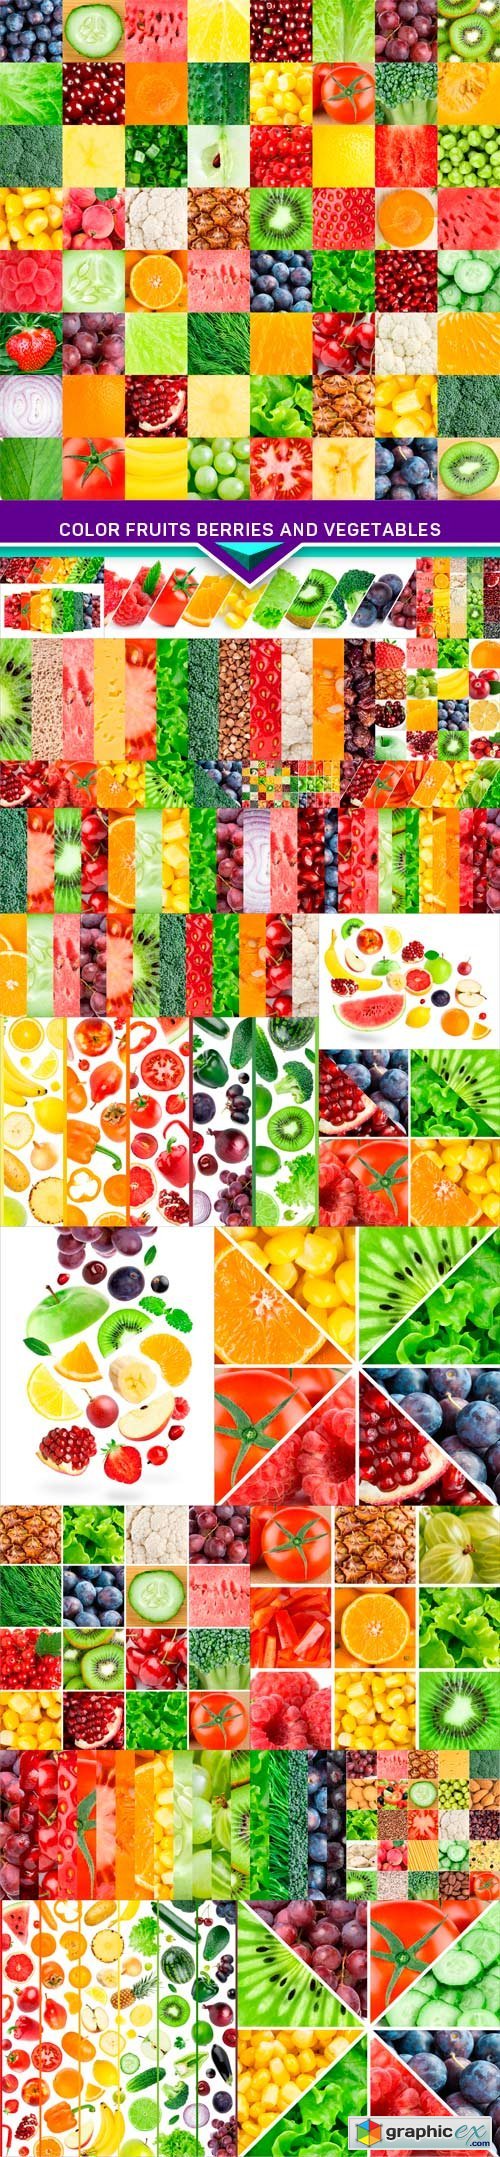 Color fruits berries and vegetables 25x JPEG